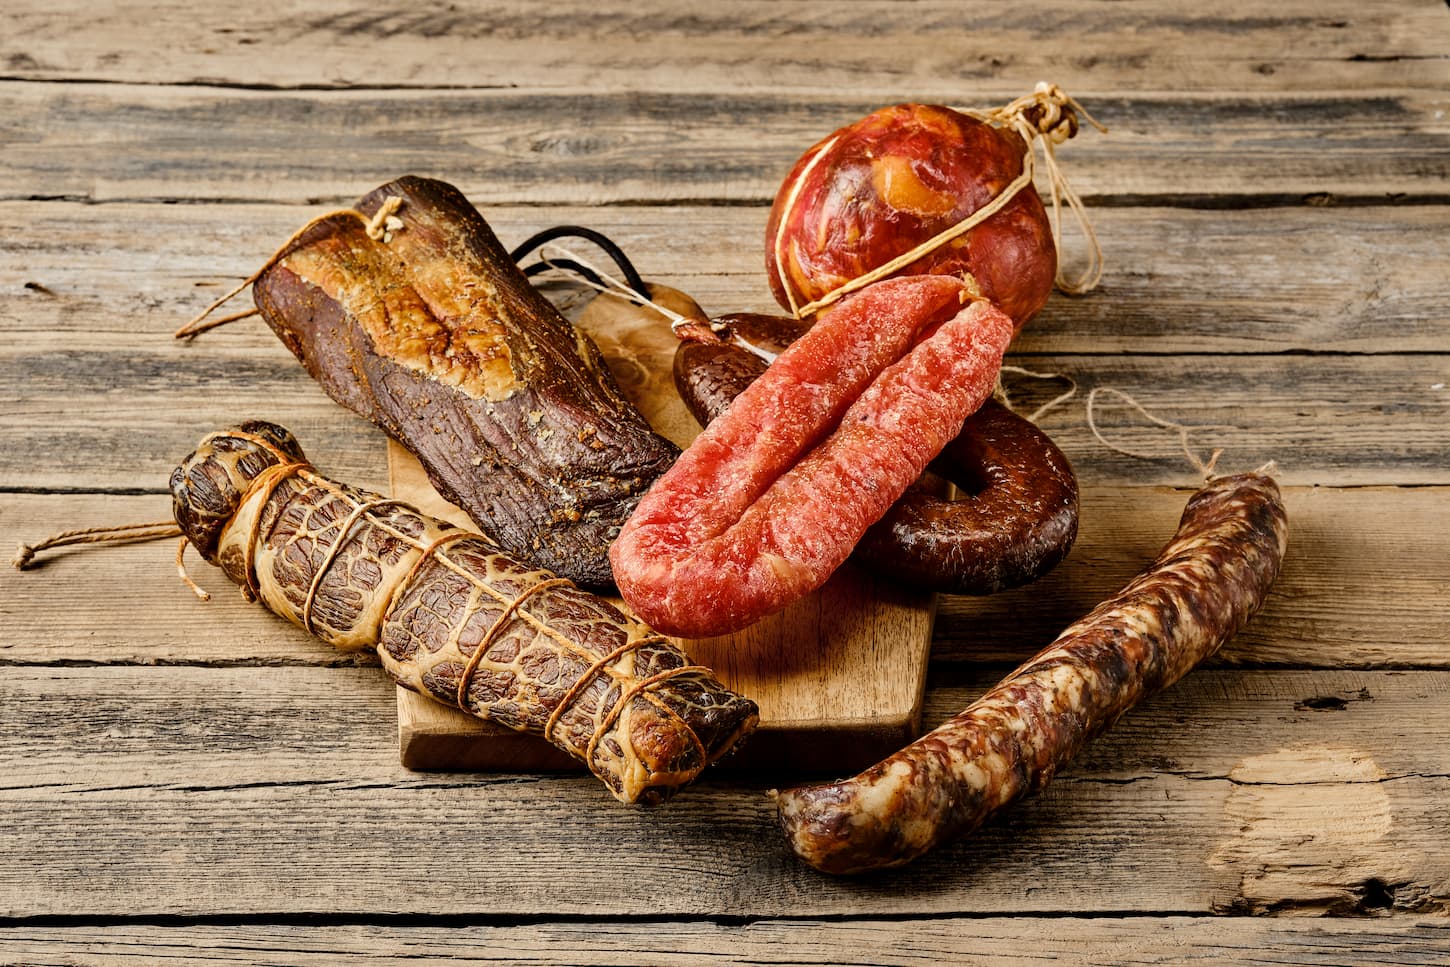 An image of various dried meat and sausages.